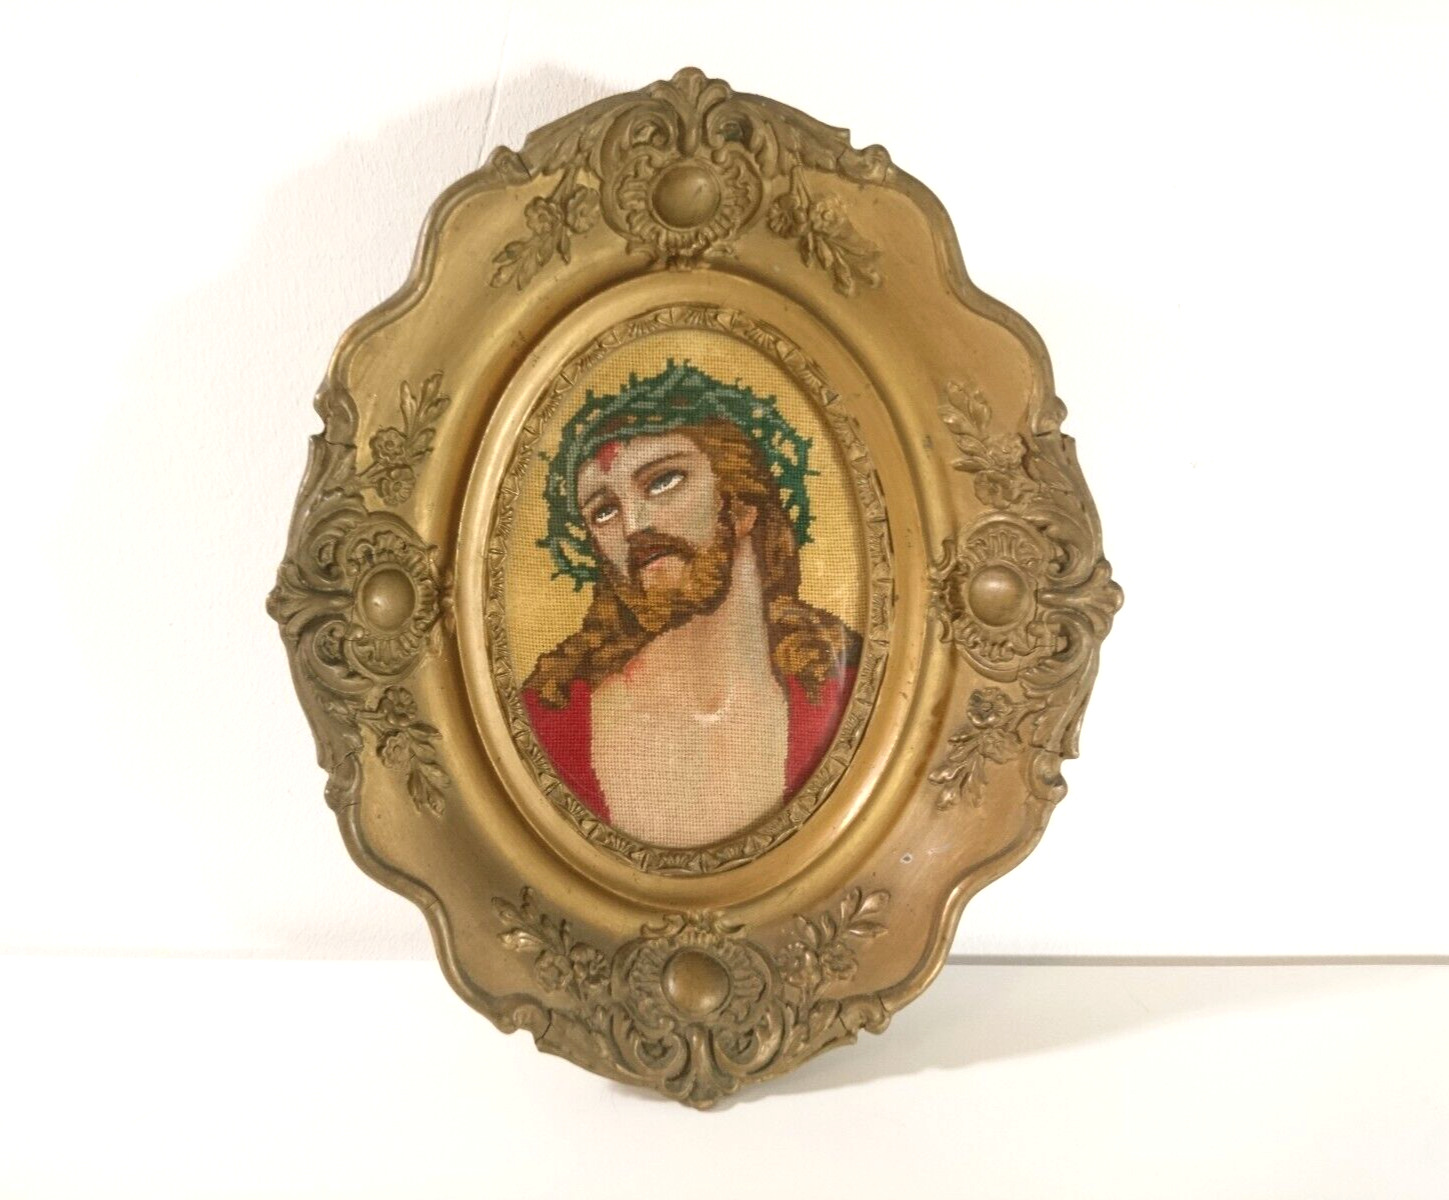 Antique Oval Picture Frame With Needlepoint Jesus 1910s Austria-Hungary